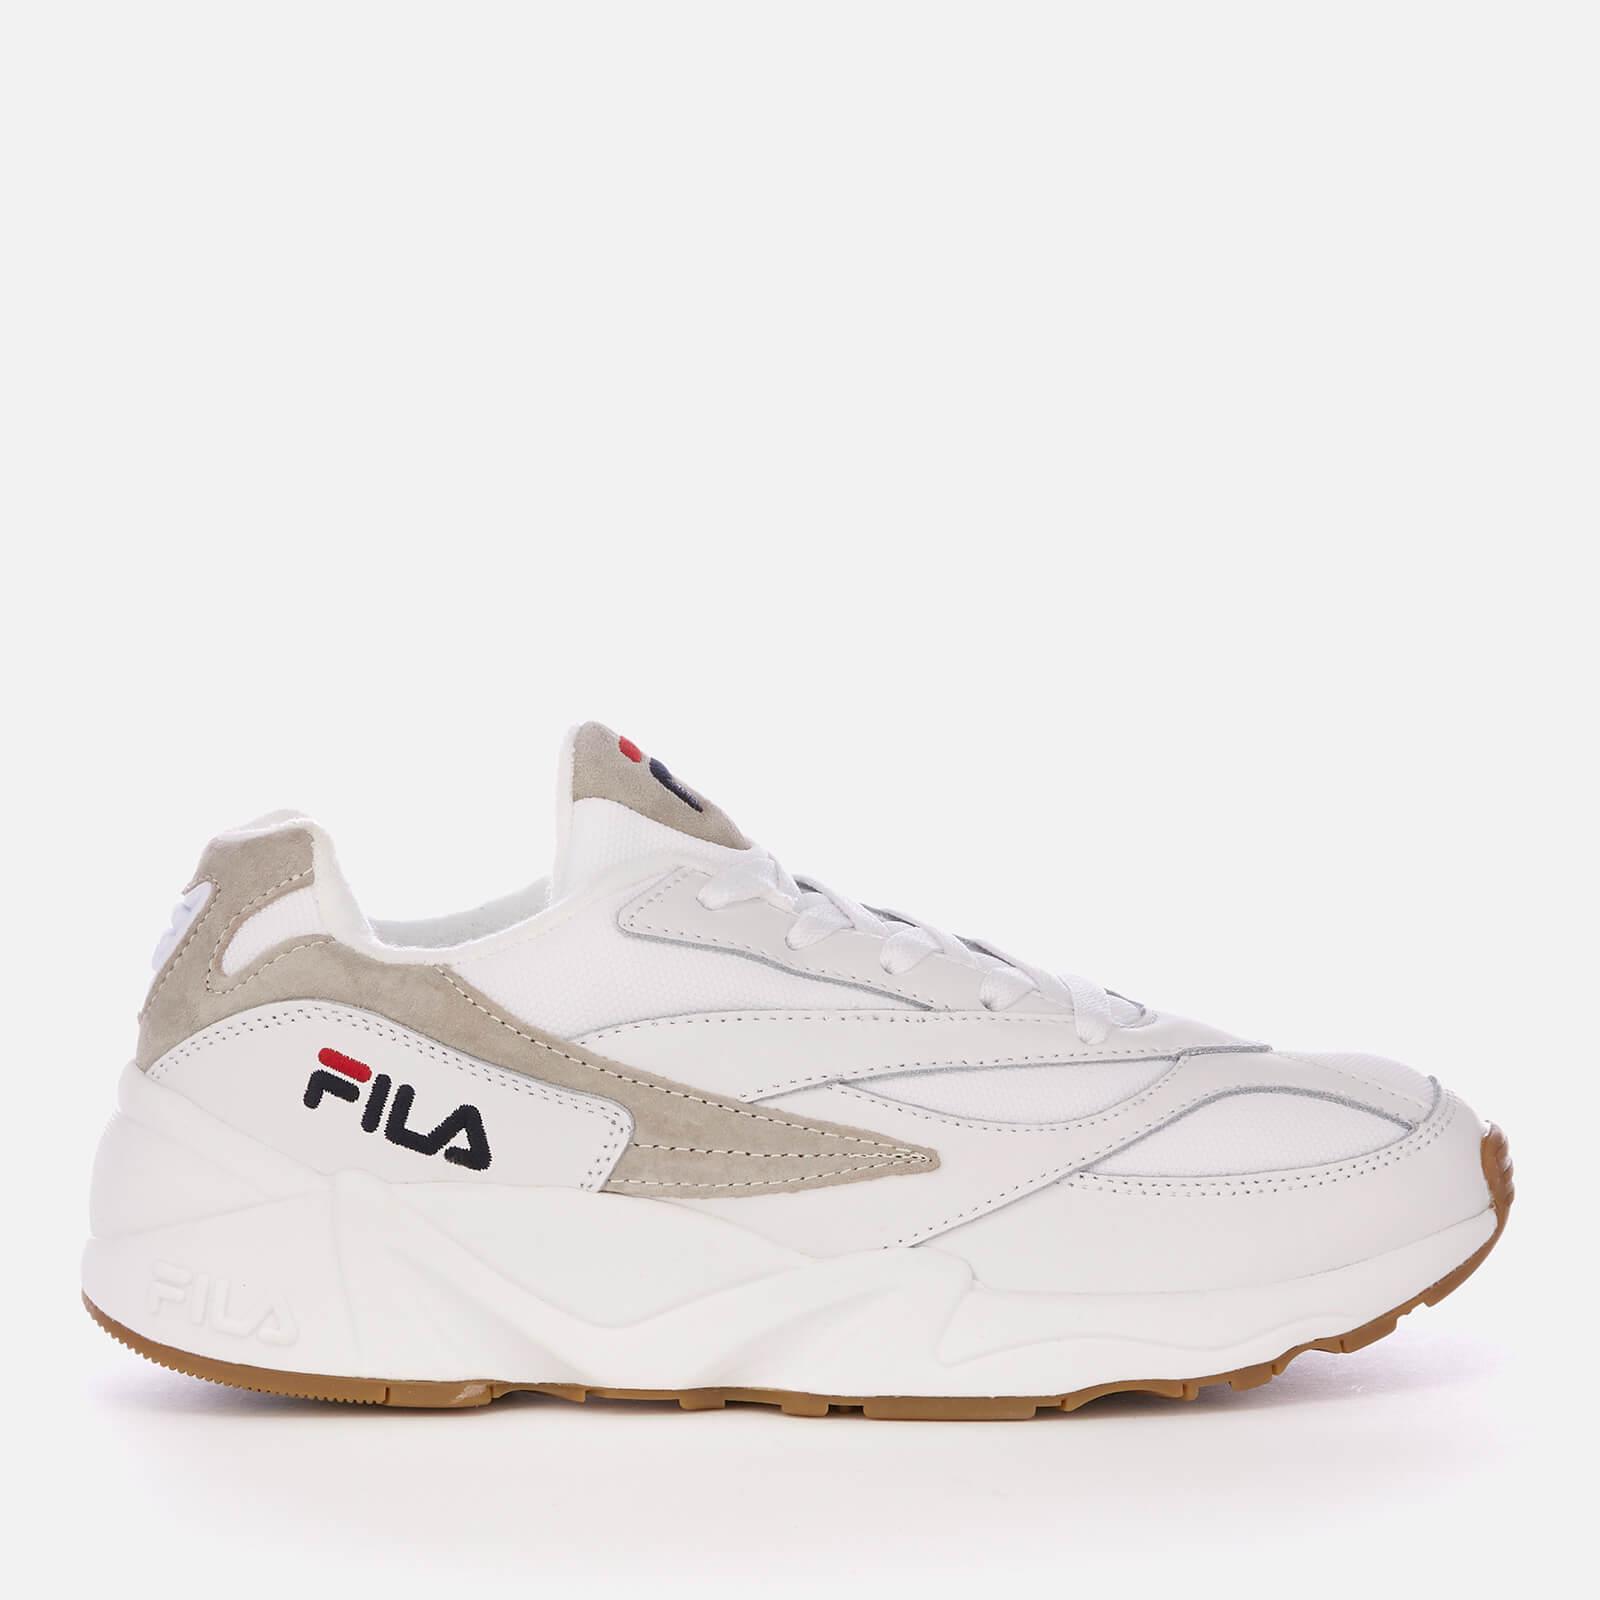 Fila Leather Venom Low Trainers in White for Men - Lyst